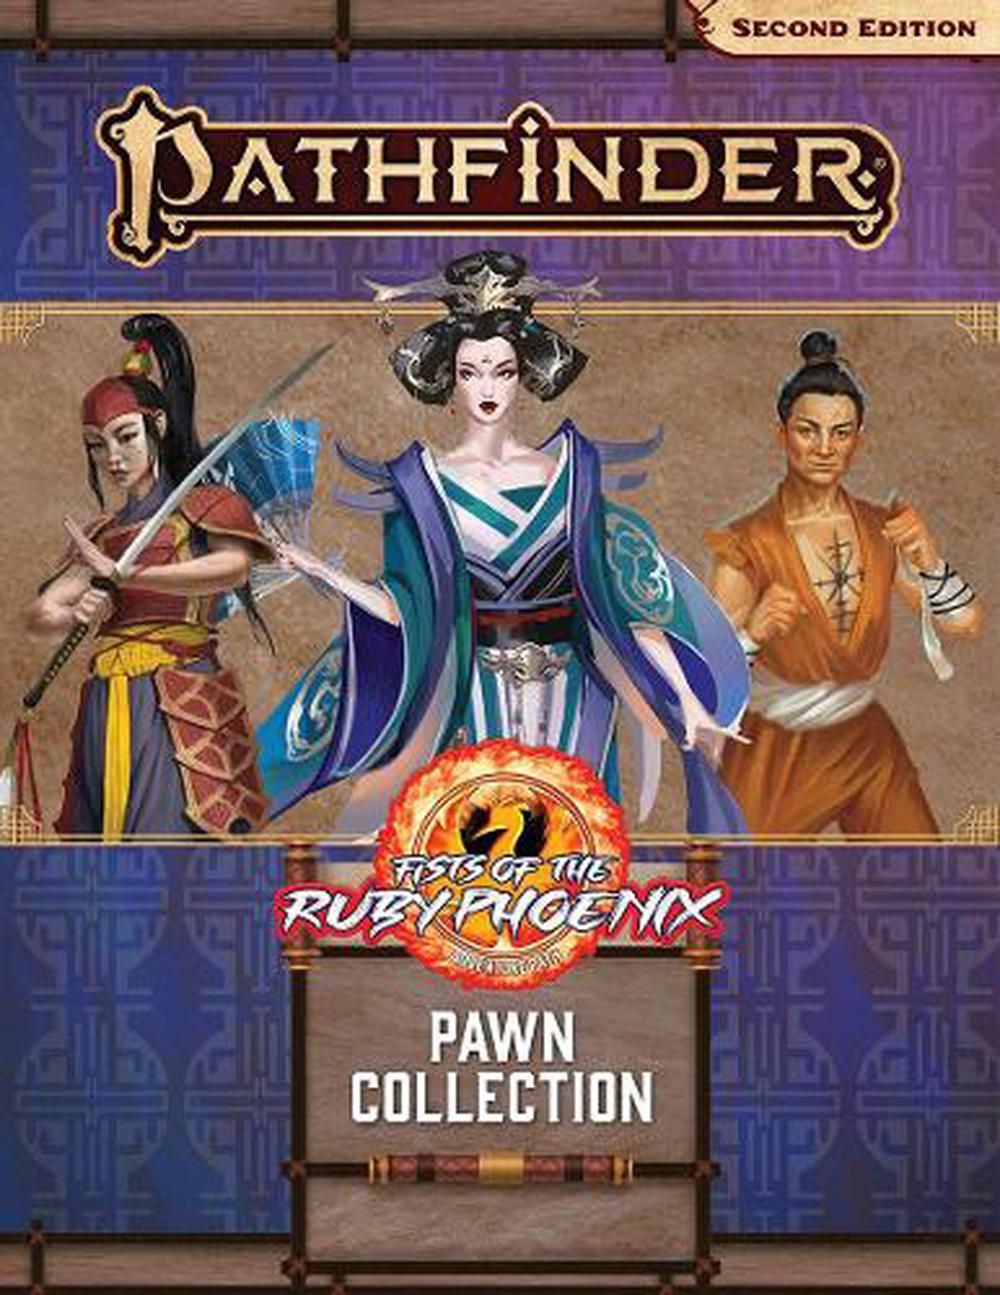 Fists of the Ruby Phoenix Pawn Collection - Pathfinder Second Edition (2E) RPG